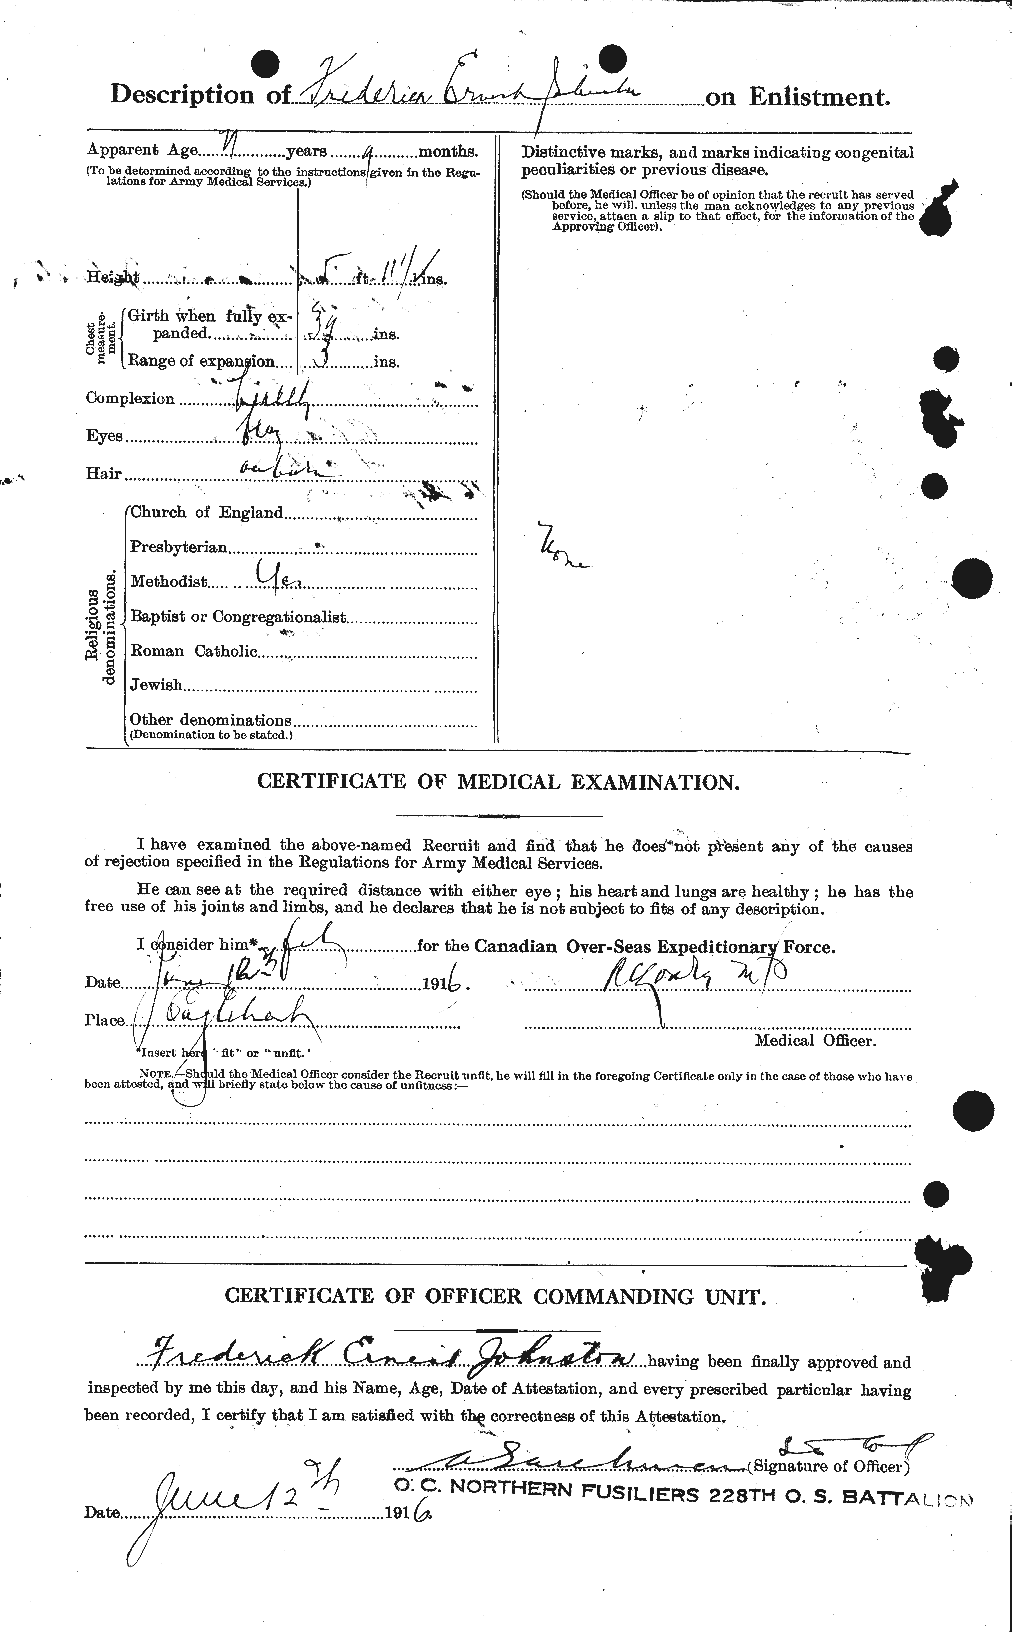 Personnel Records of the First World War - CEF 423307b